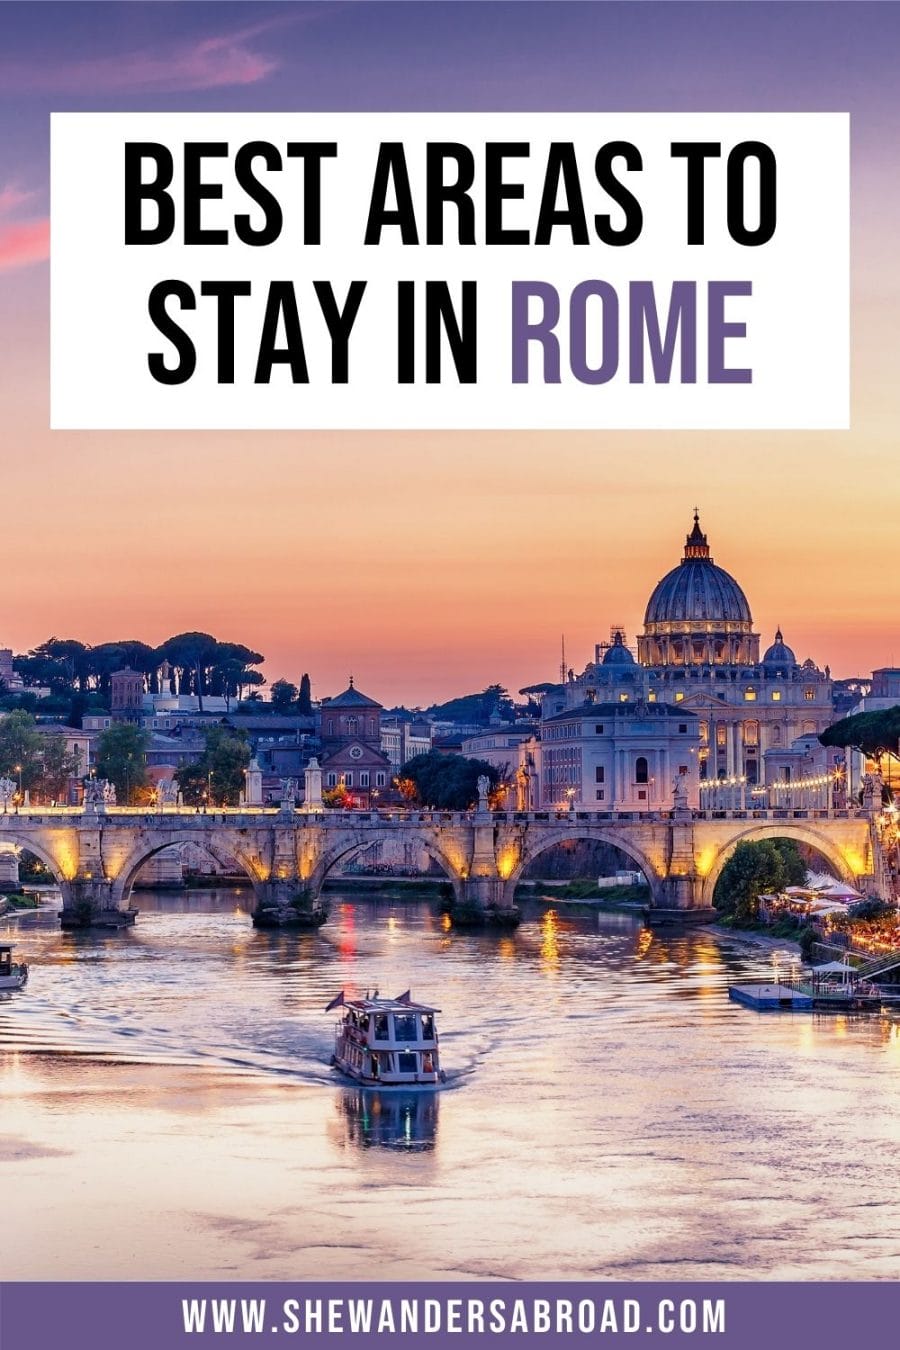 Top 9 Best Areas to Stay in Rome